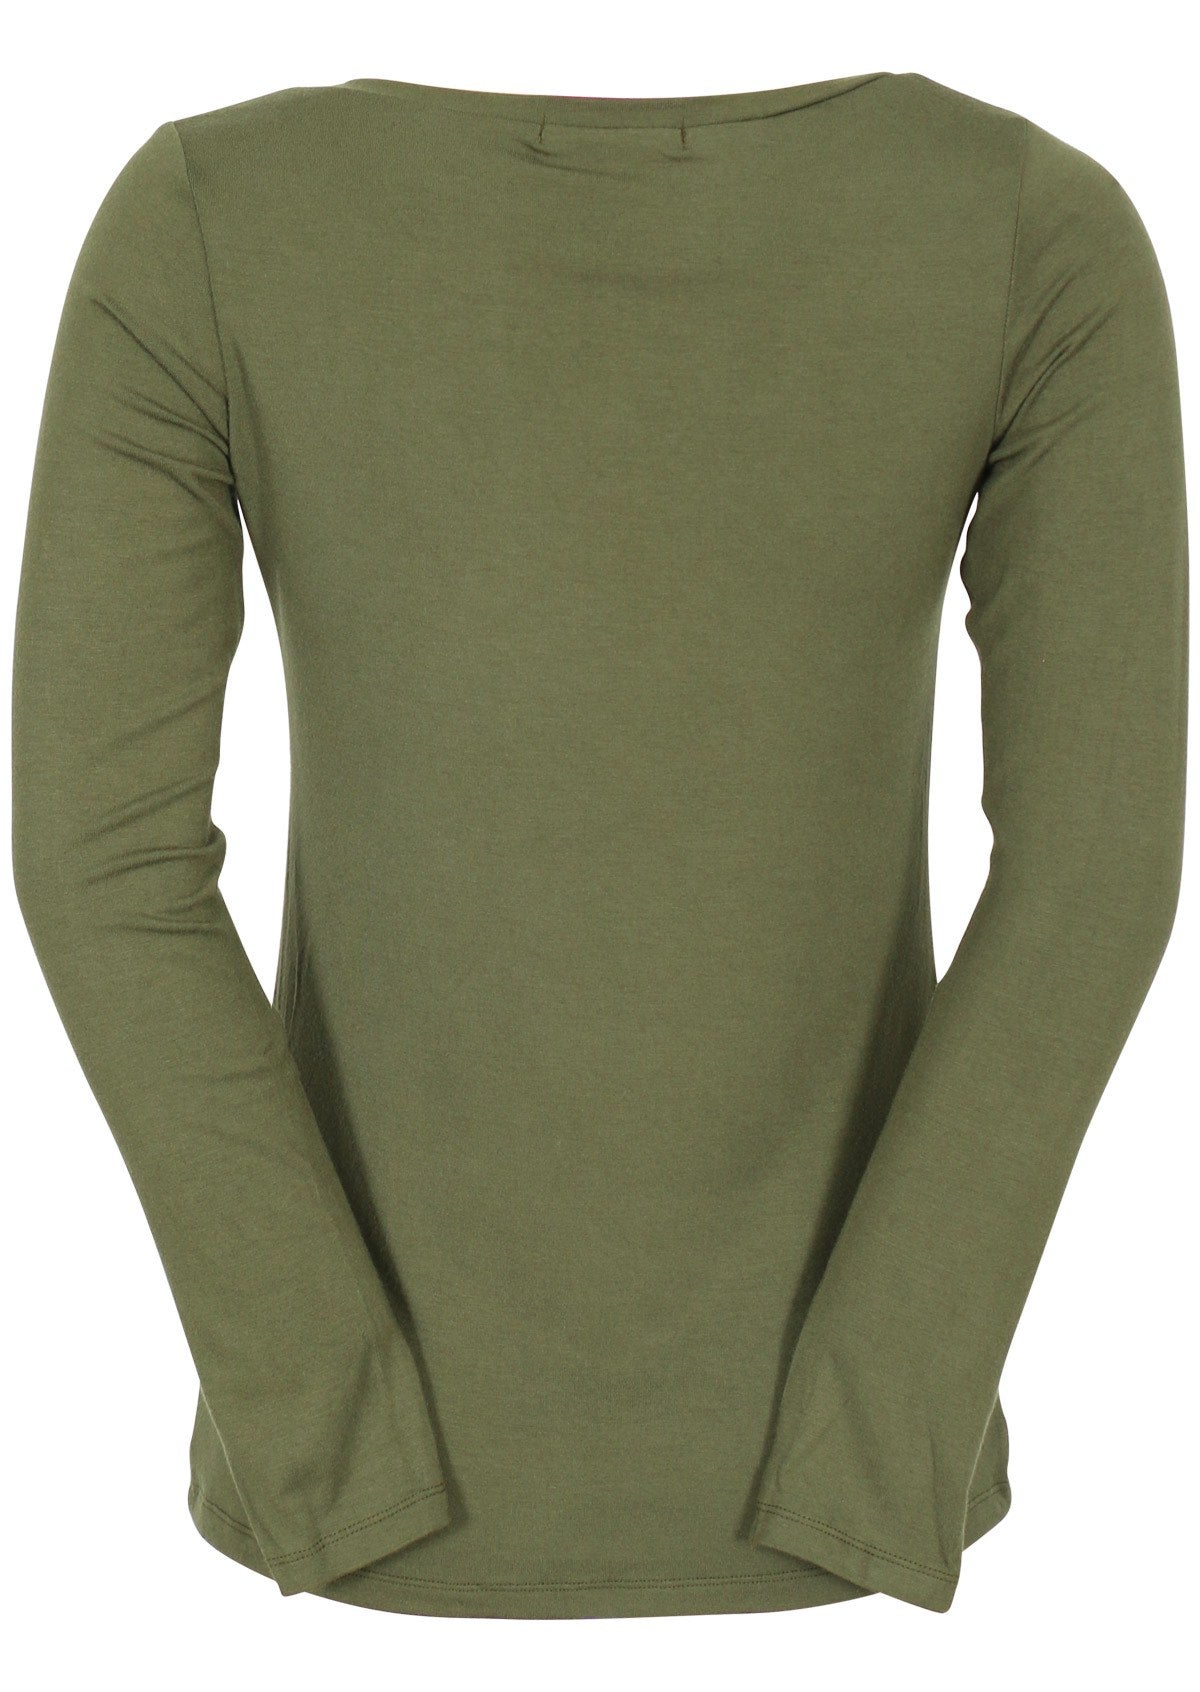 Back view of women's olive green long sleeve stretch v-neck soft rayon top.